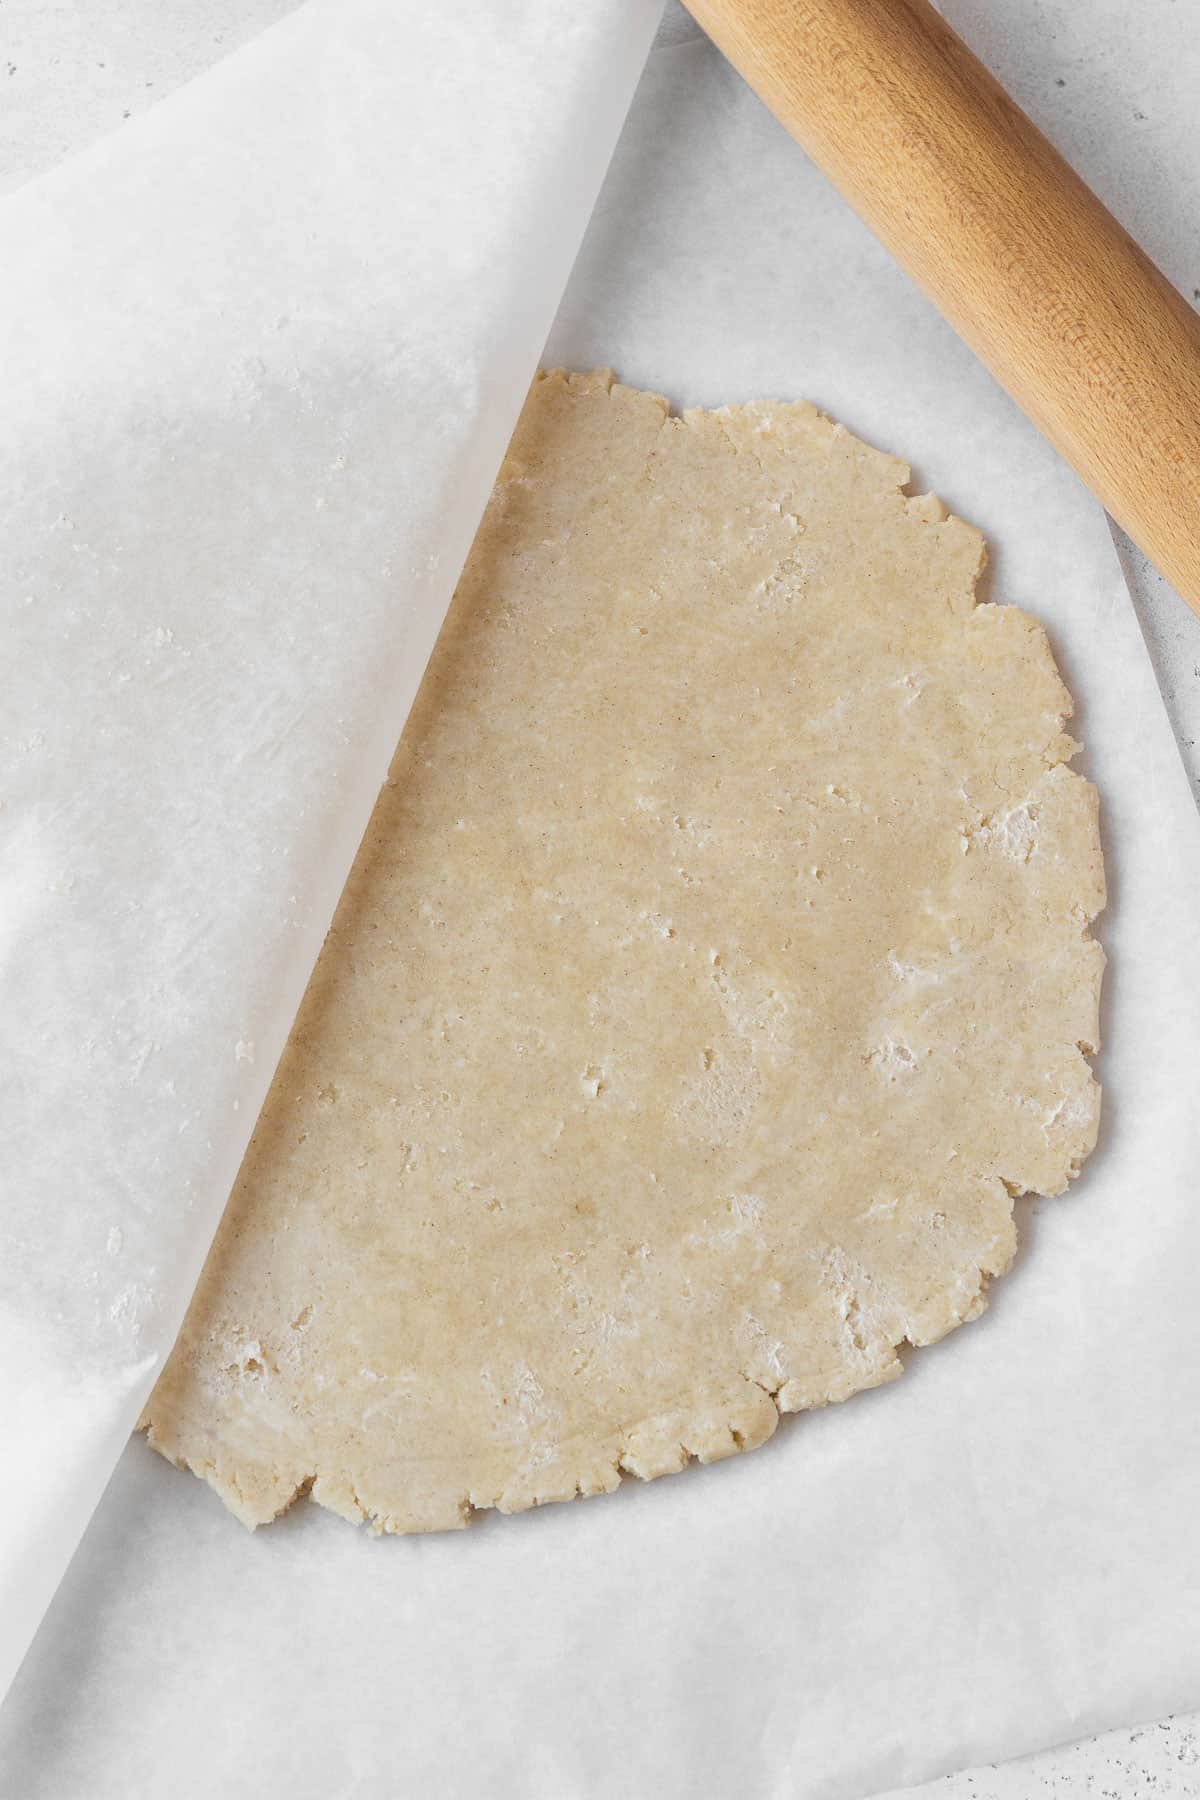 Dairy-free pie dough being rolled out between two sheets of parchment paper.